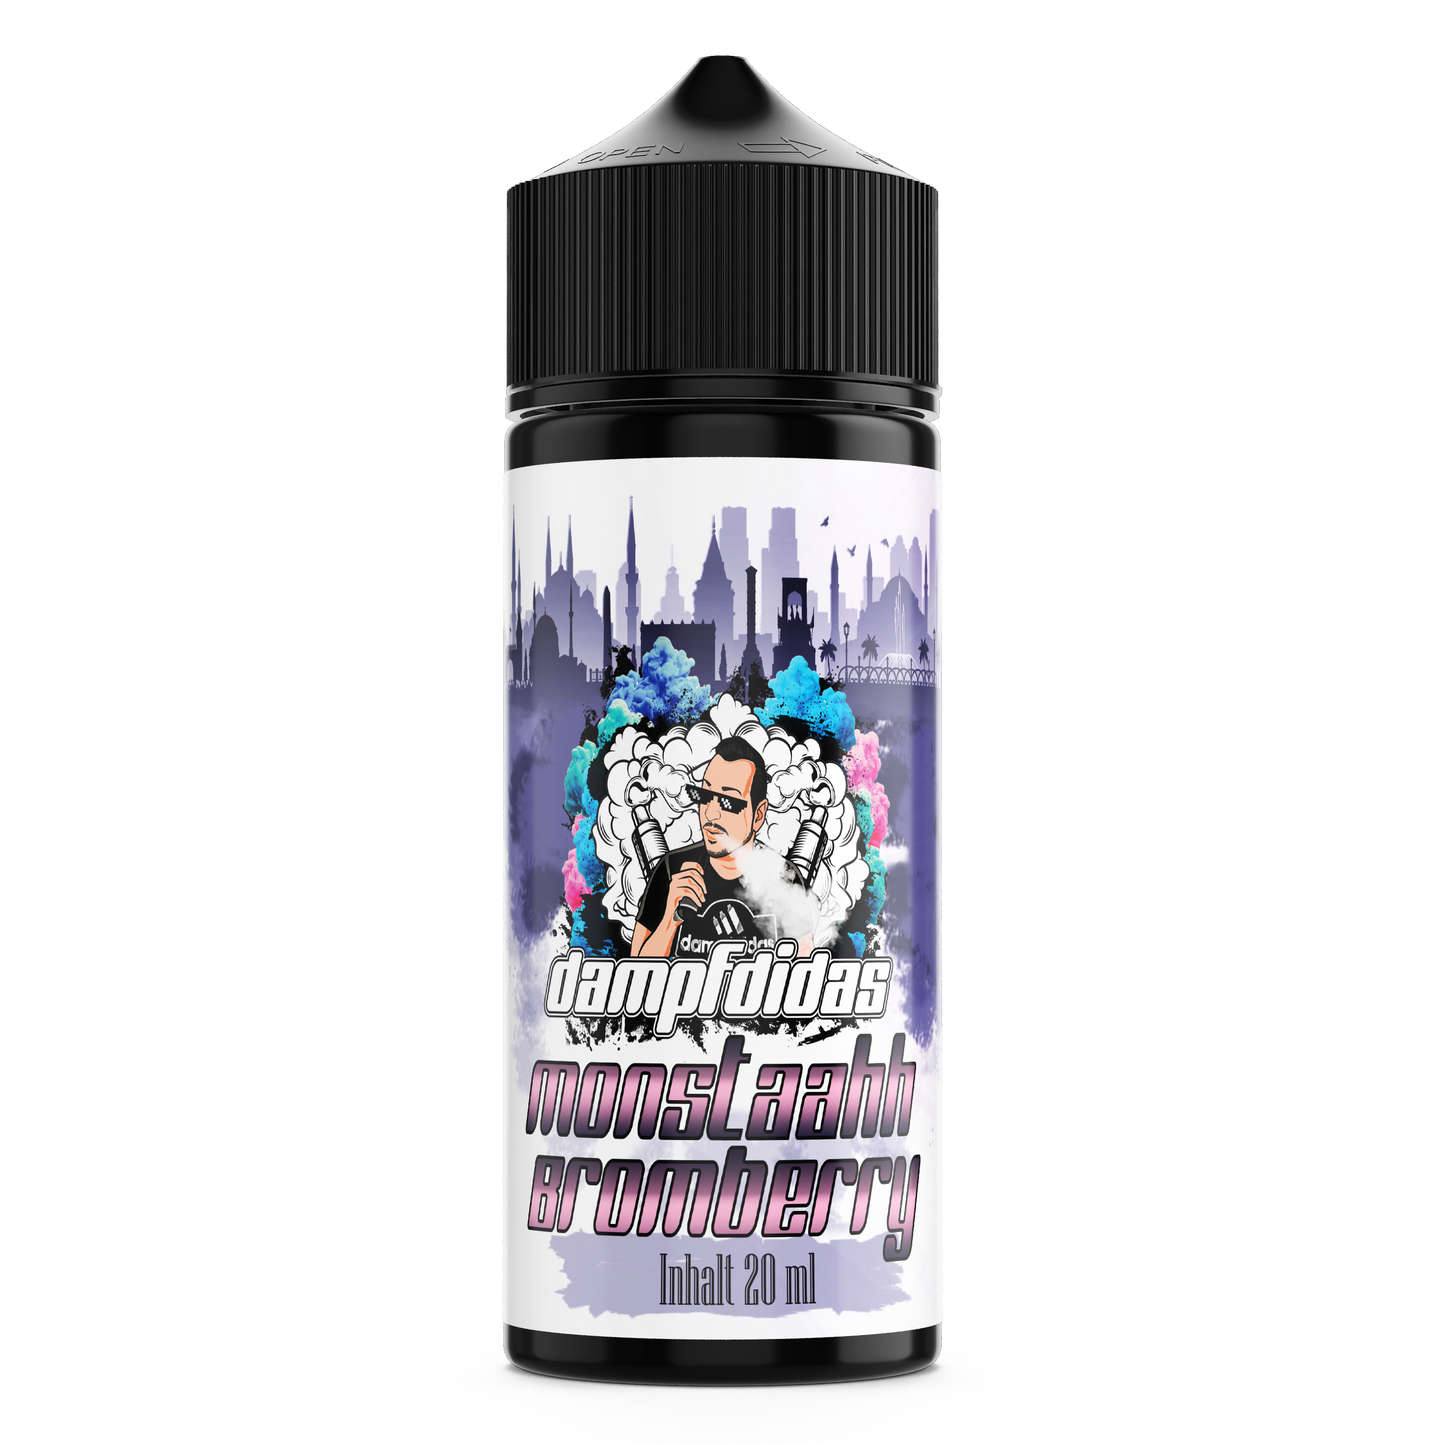 Monstaahh Bromberry 20ml Aroma